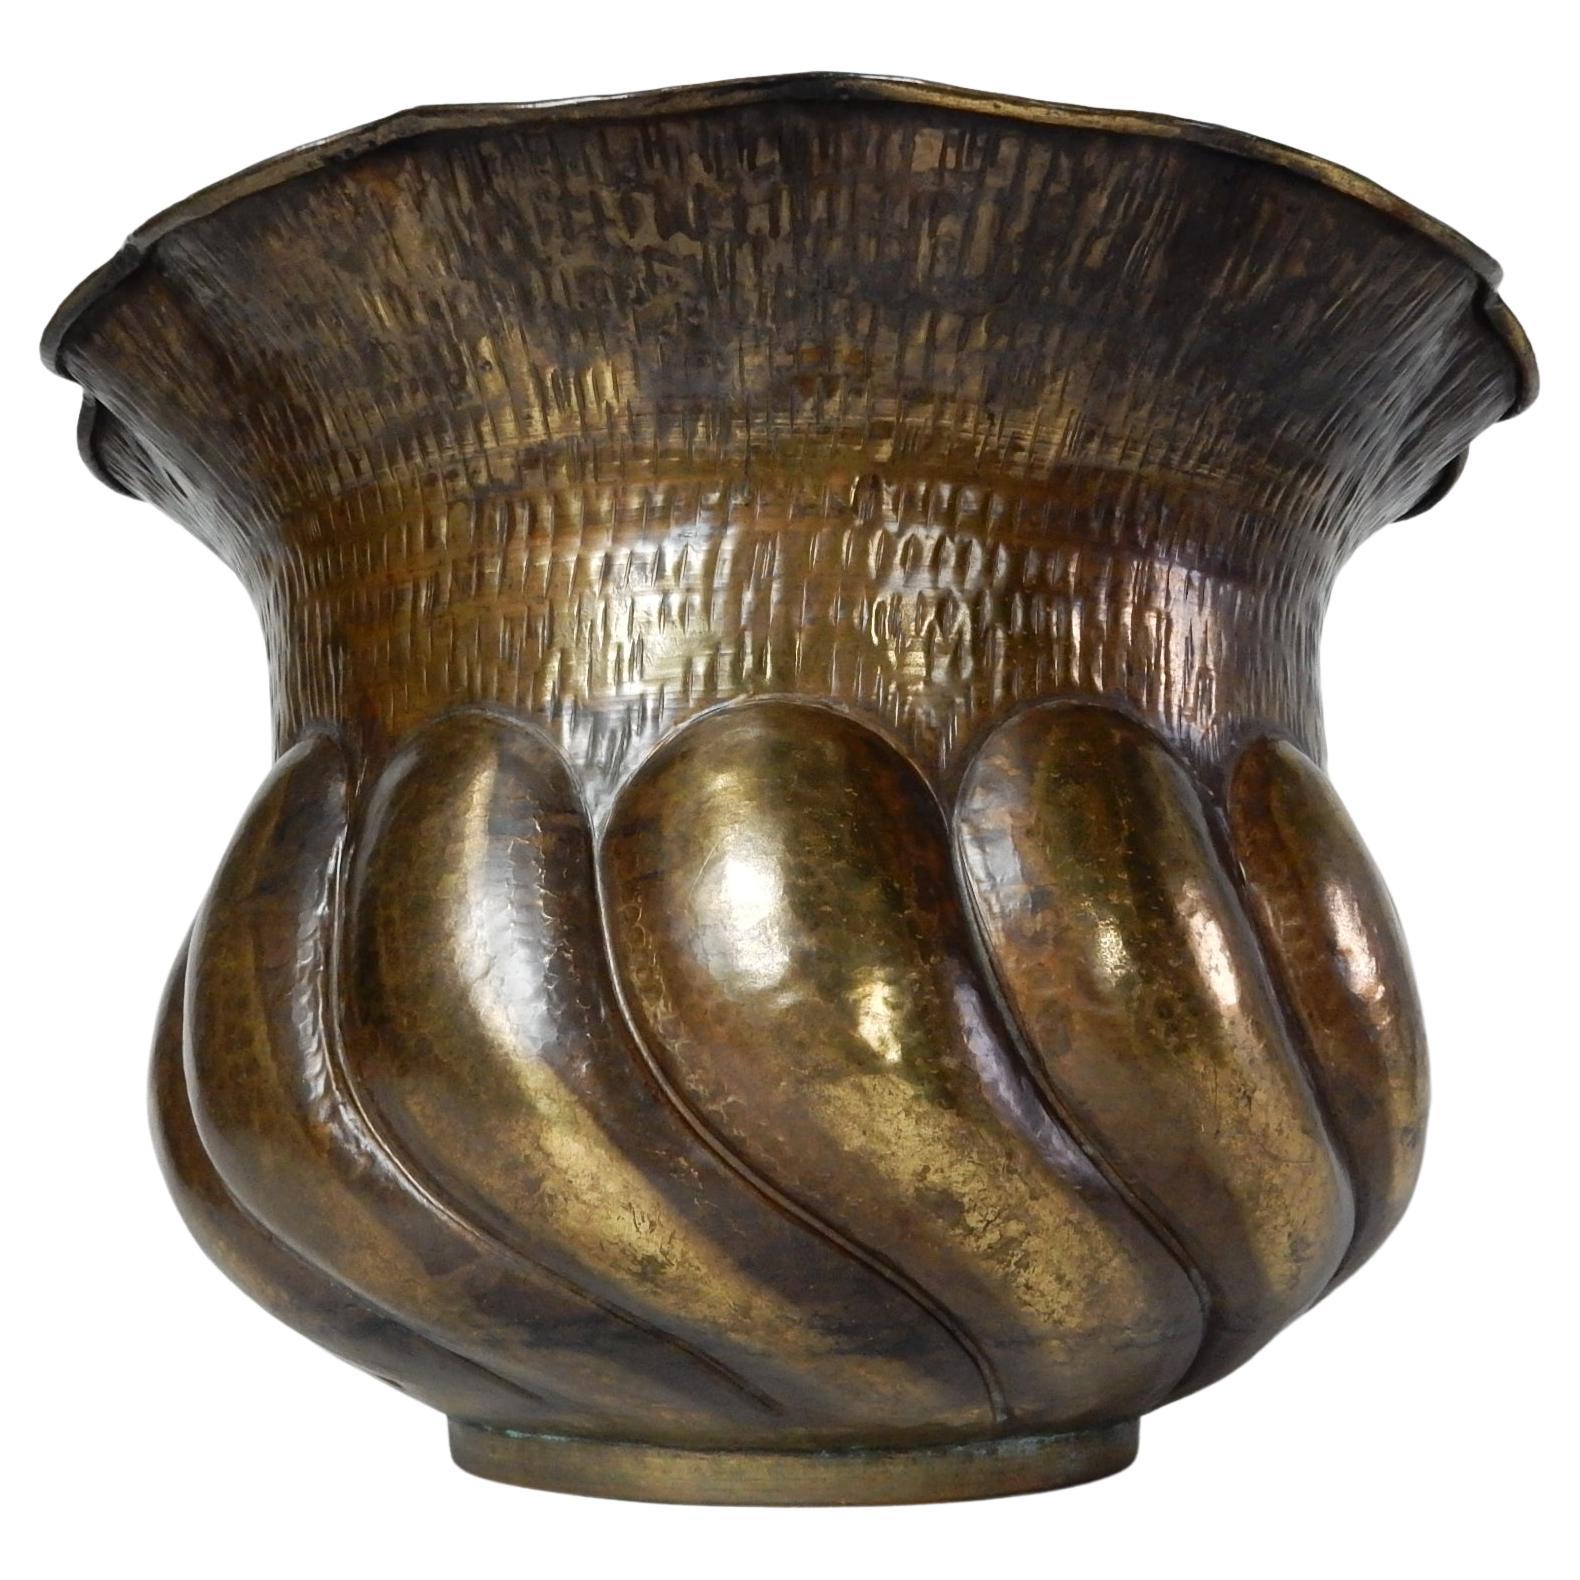 Egidio Casagrande attributed hammered copper / brass jardinière pot.
Hand made in Italy, circa 1950's.
Warm aged patina throughout.
Large piece measuring 21in wide and 14in tall. 
Smallest inside width is 14-1/2in.
No holes or issues.
 